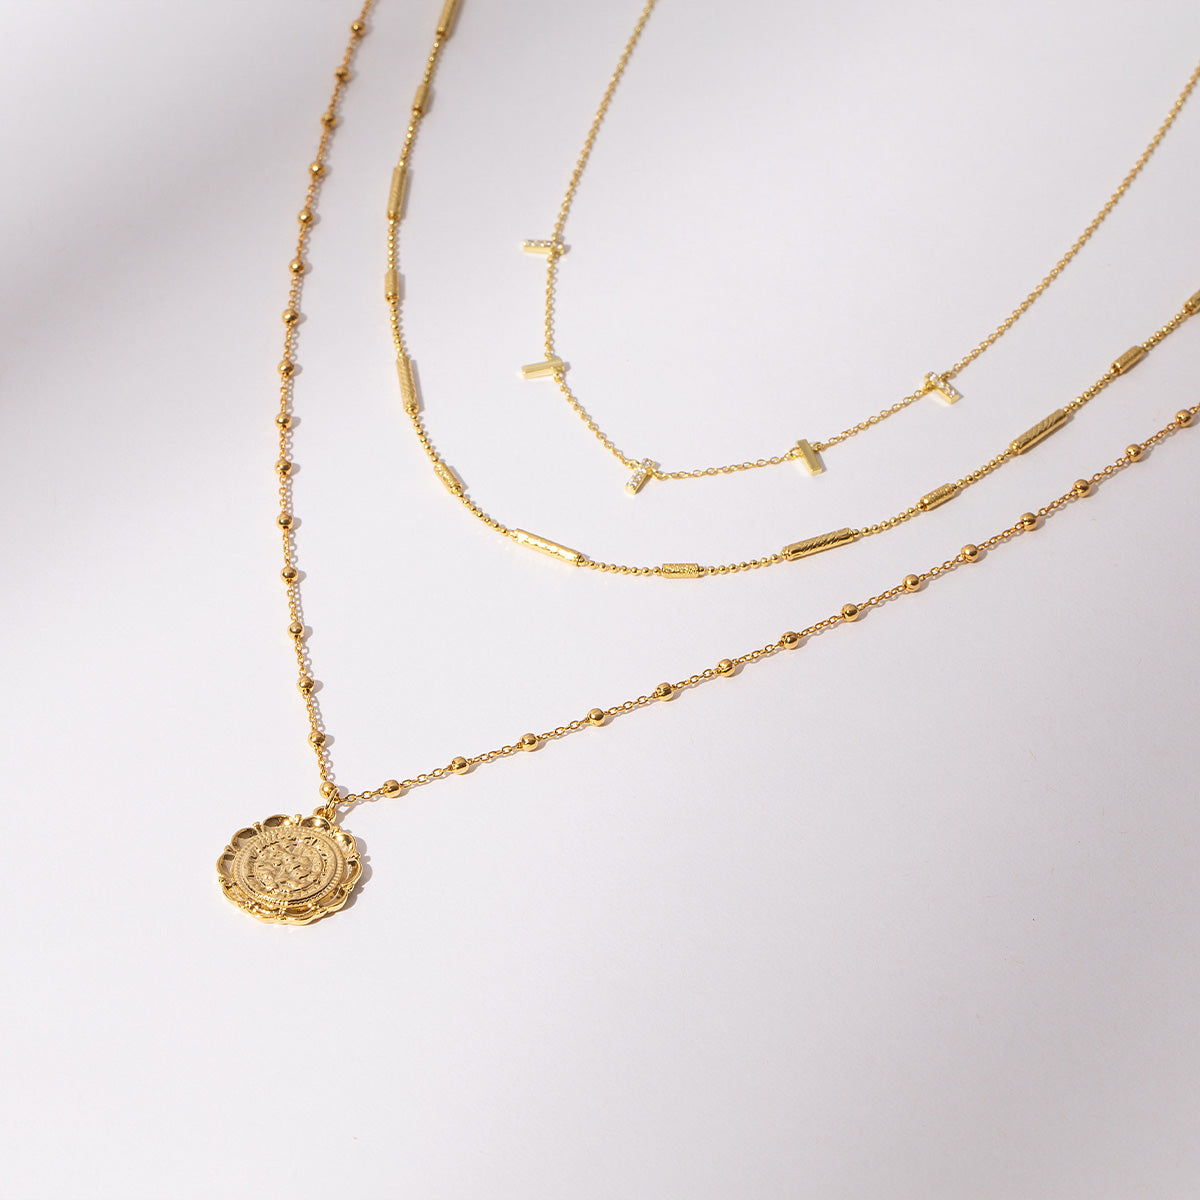 Intricate Chain Necklace Set | Gold | Product Image | Uncommon James